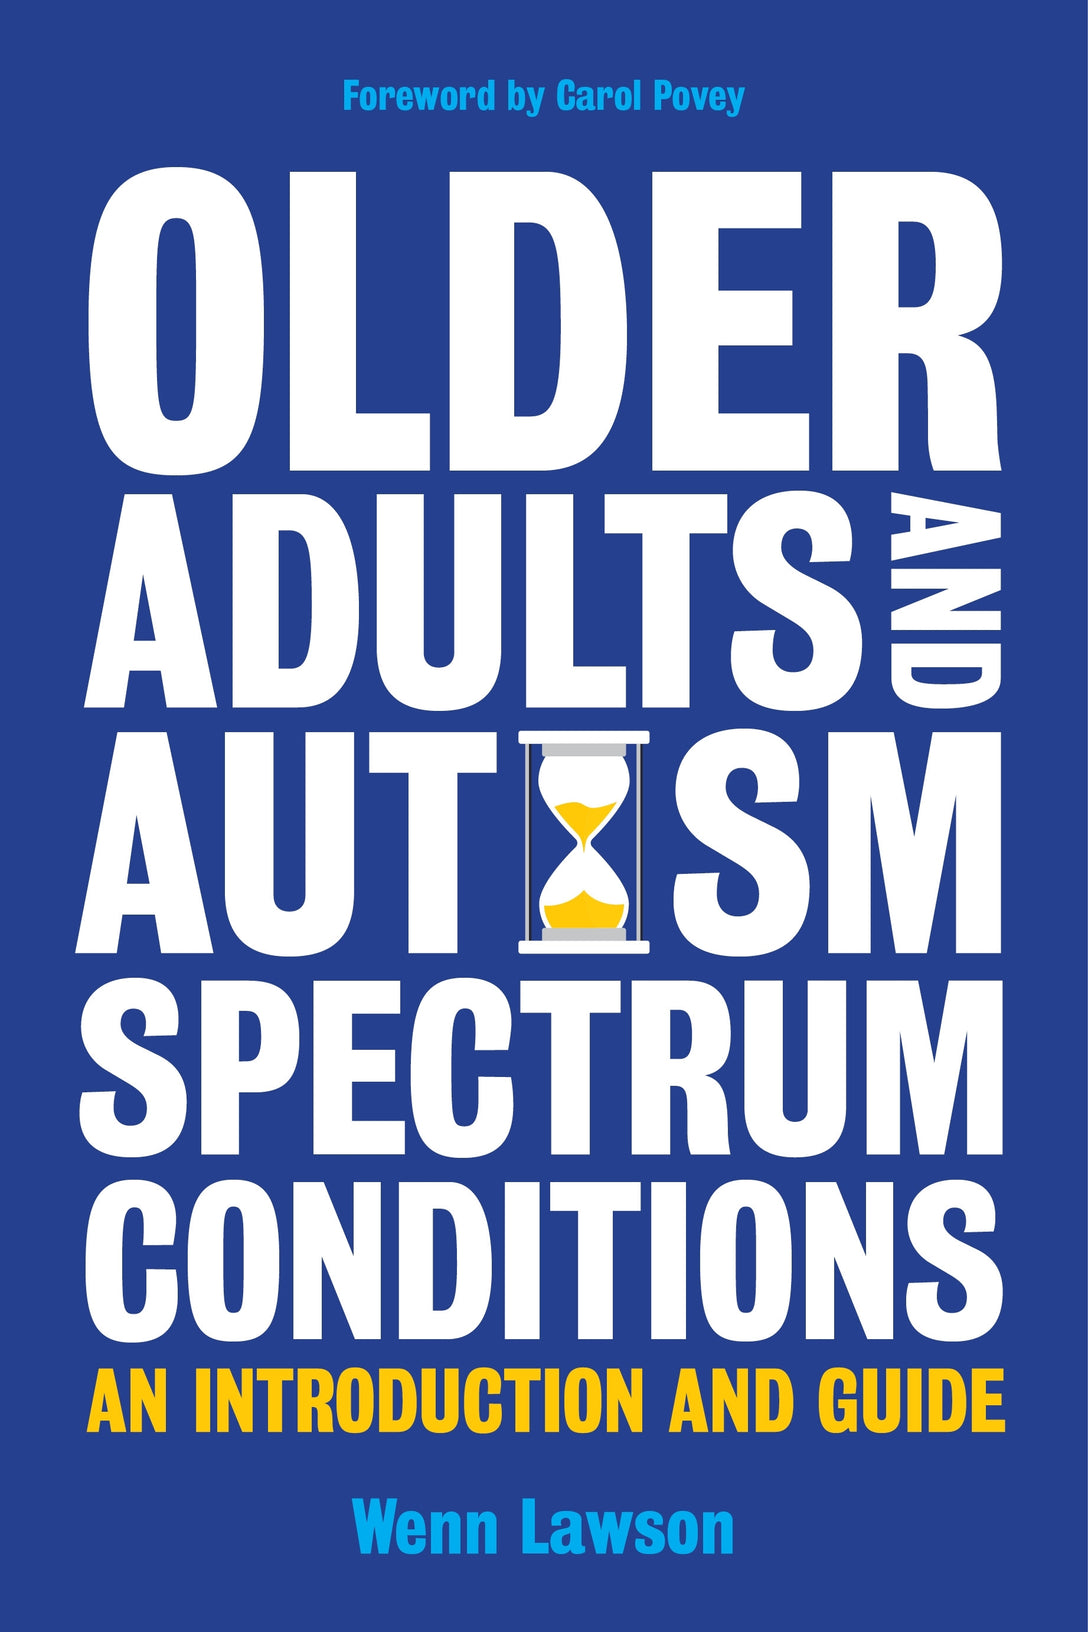 Older Adults and Autism Spectrum Conditions by Carol Povey, Dr Wenn Lawson